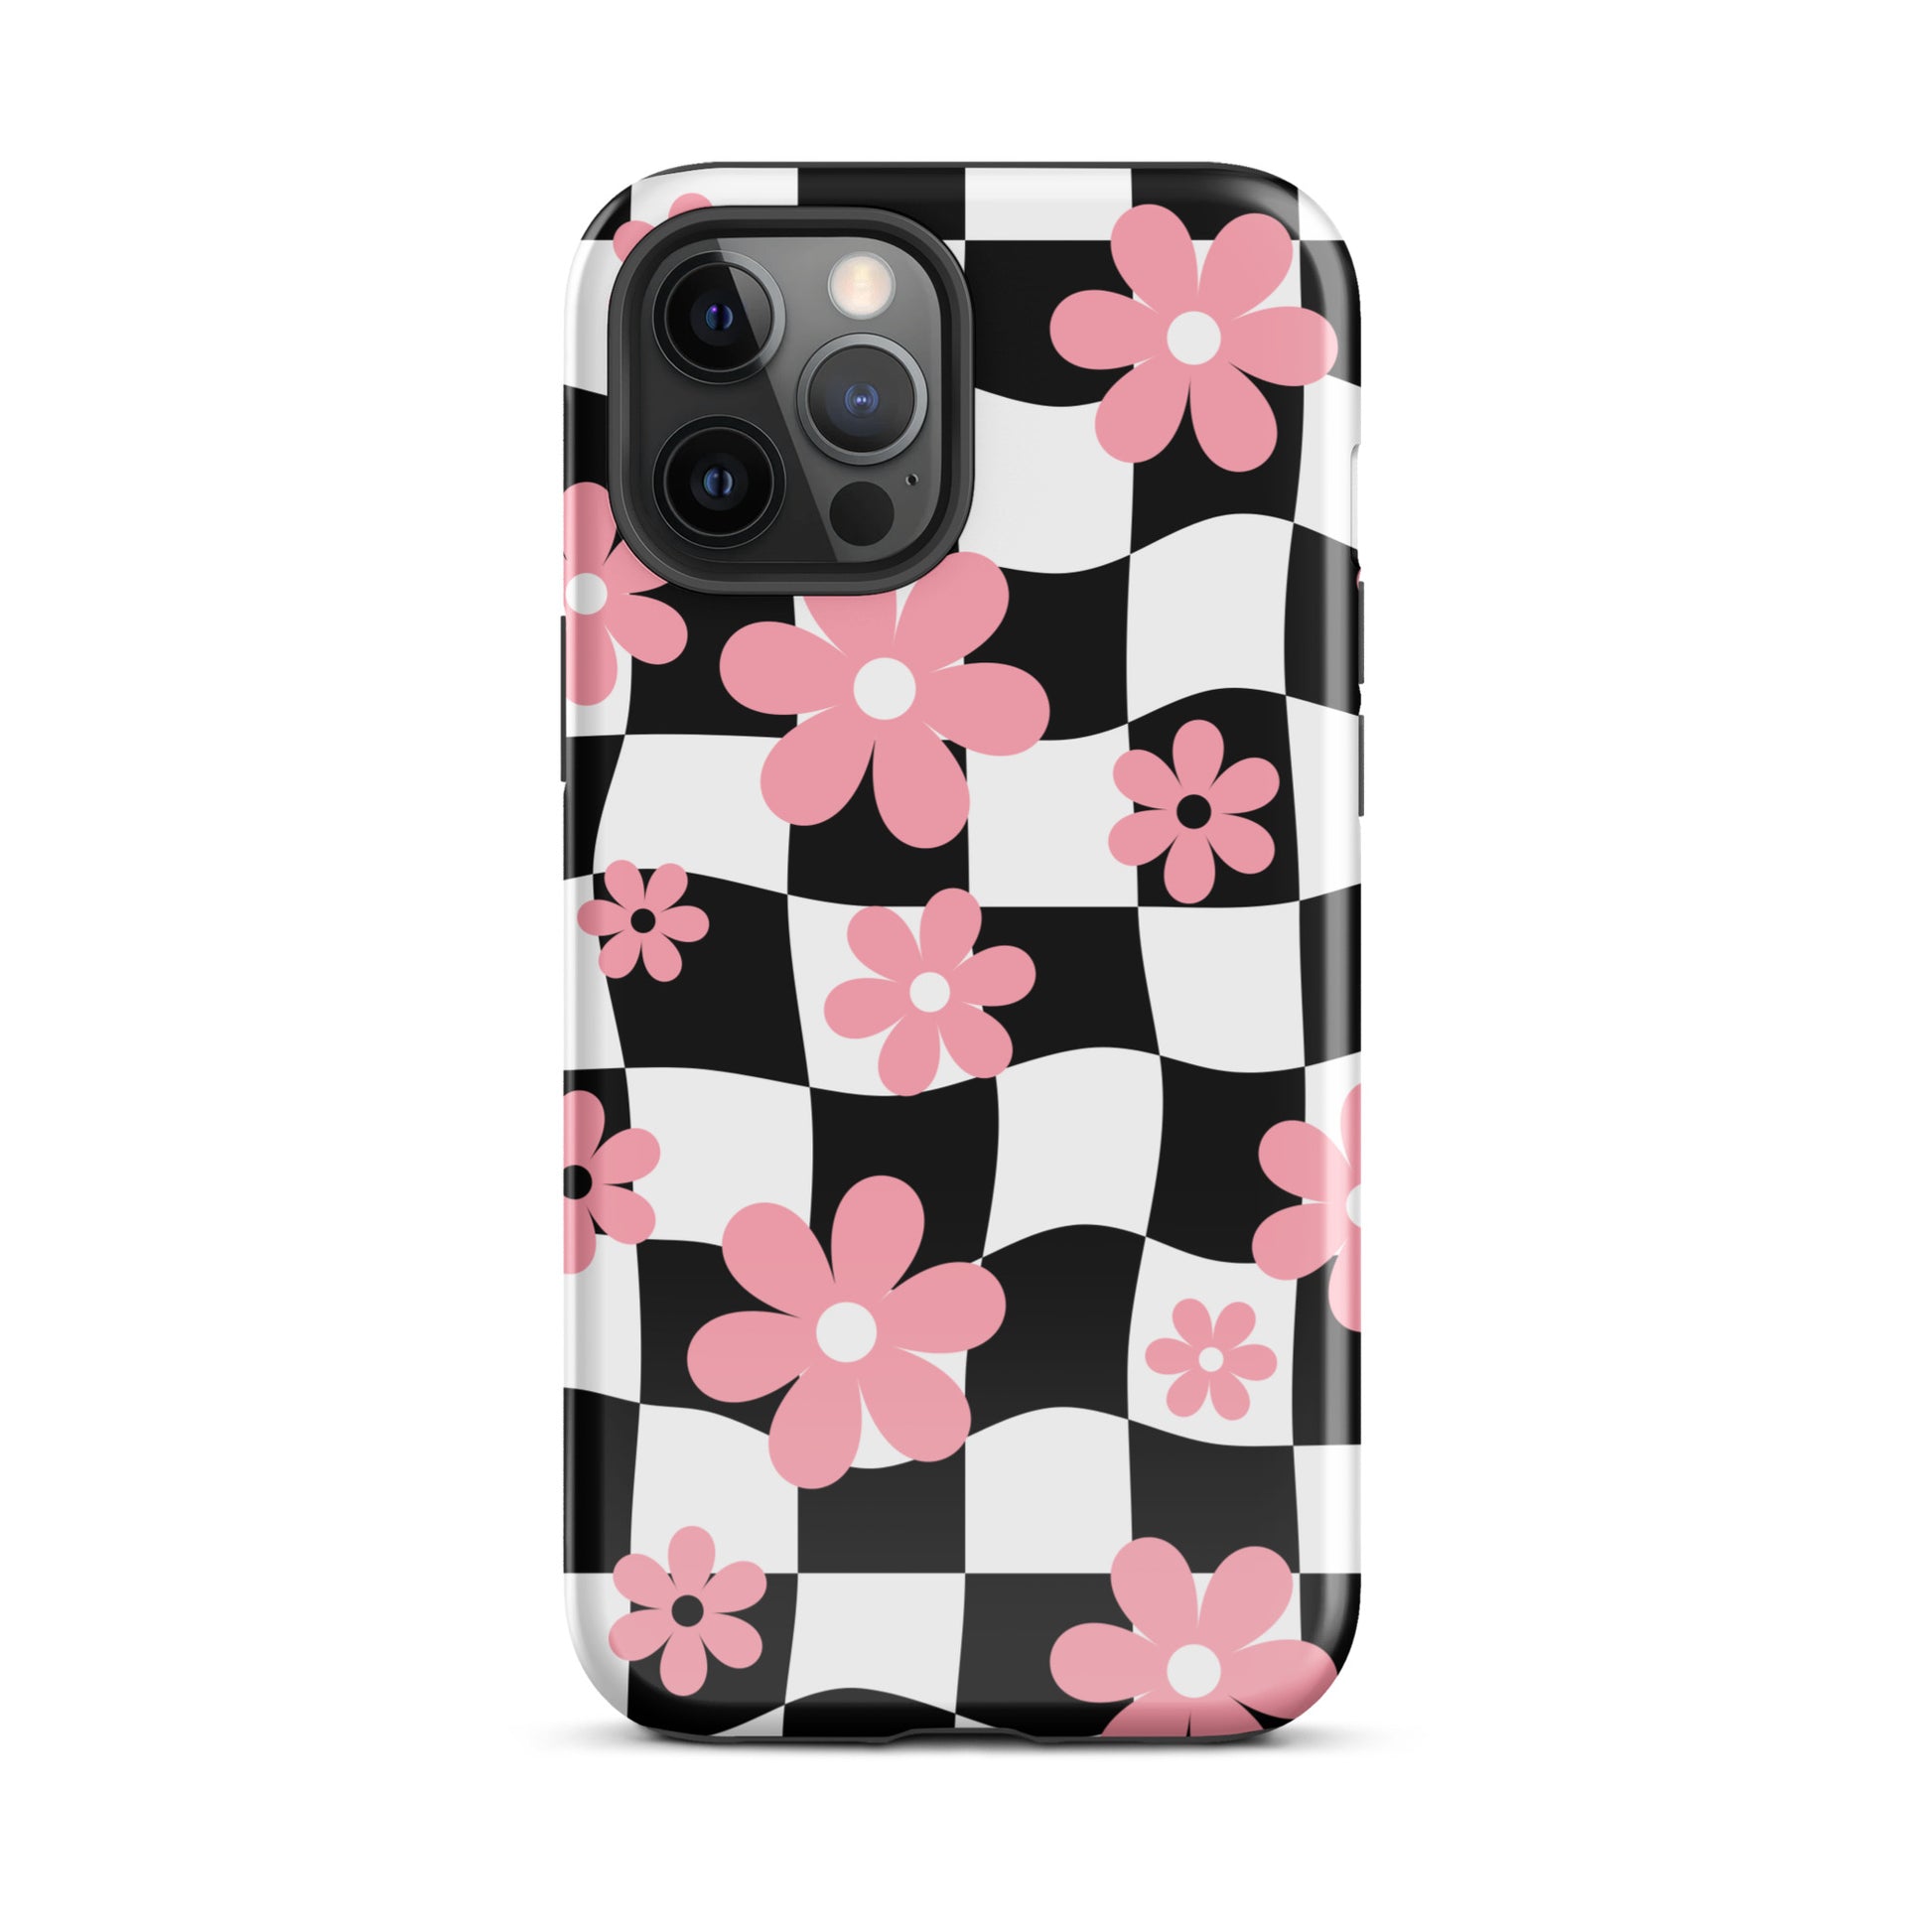 Floral Wavy Checkered iPhone Case iPhone 12 Pro Max Glossy